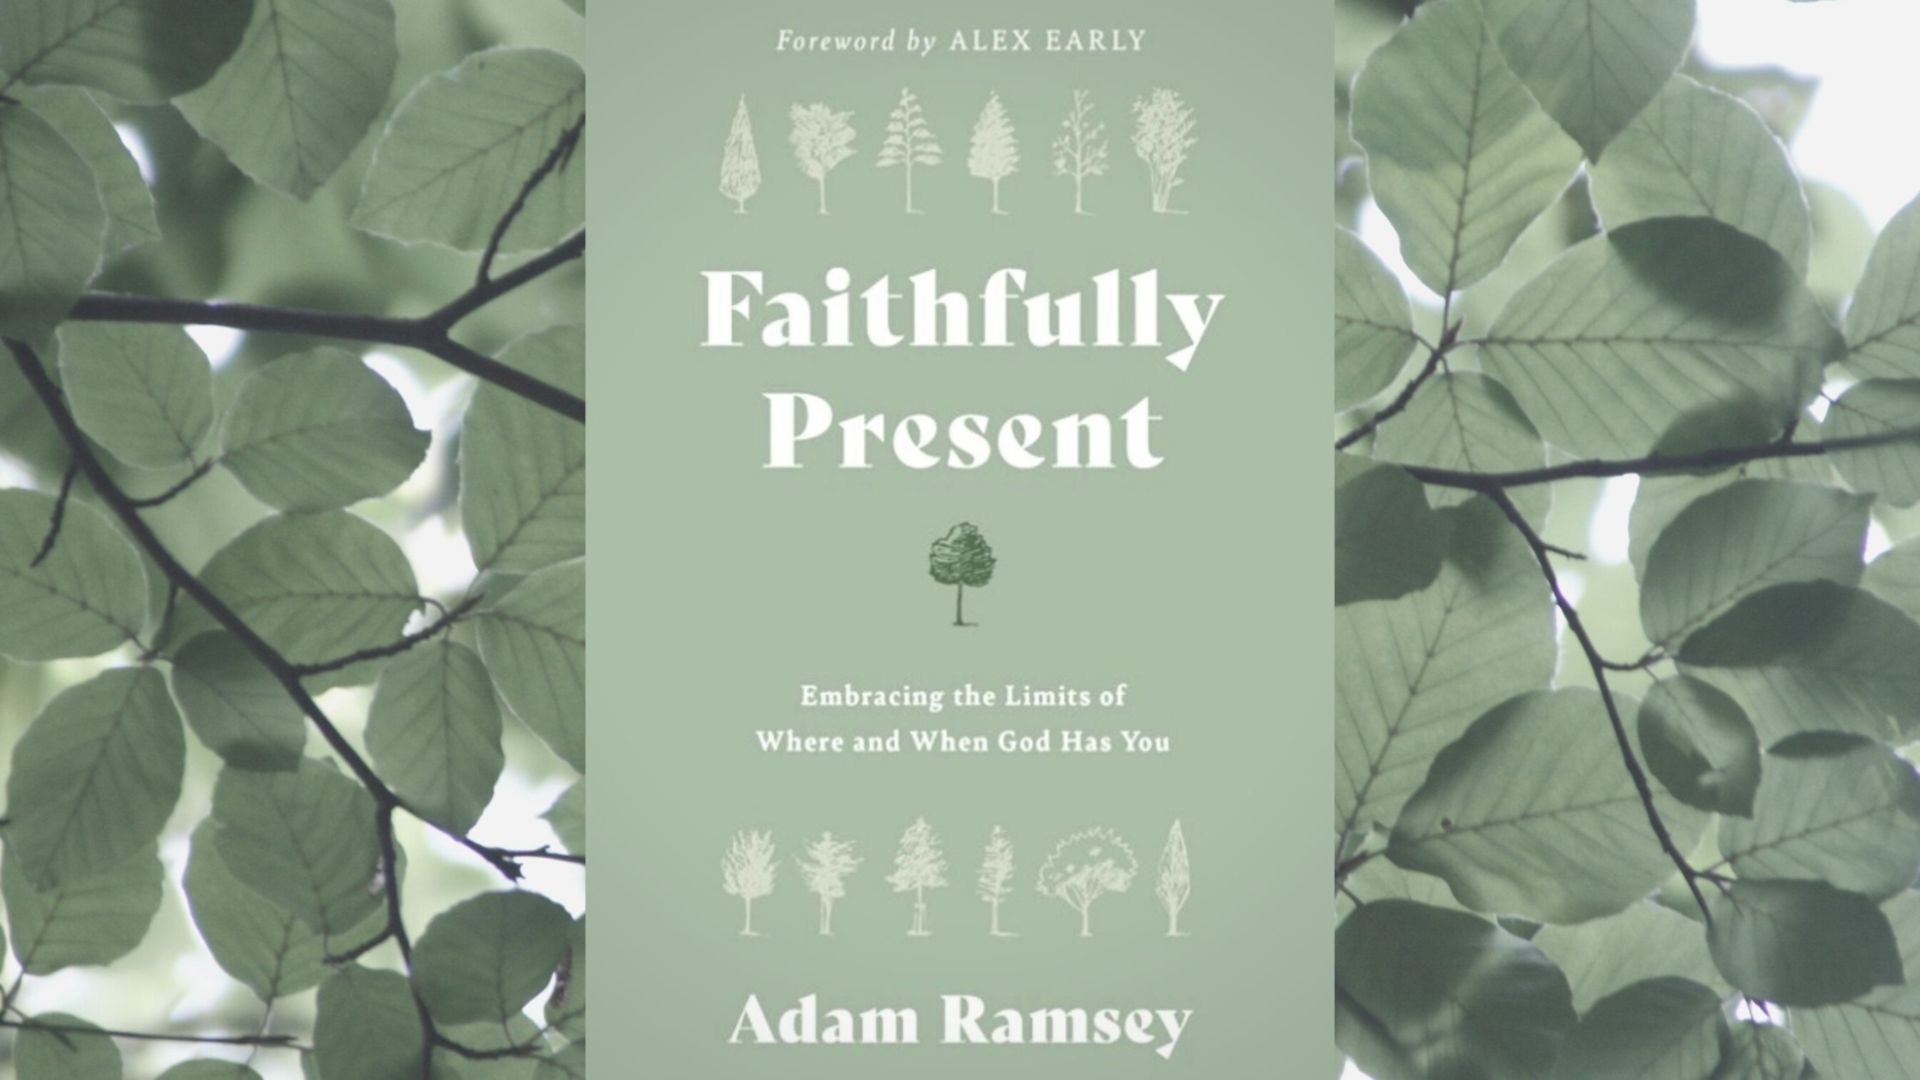 A review of the book 'Faithfully Present' by Adam Ramsey